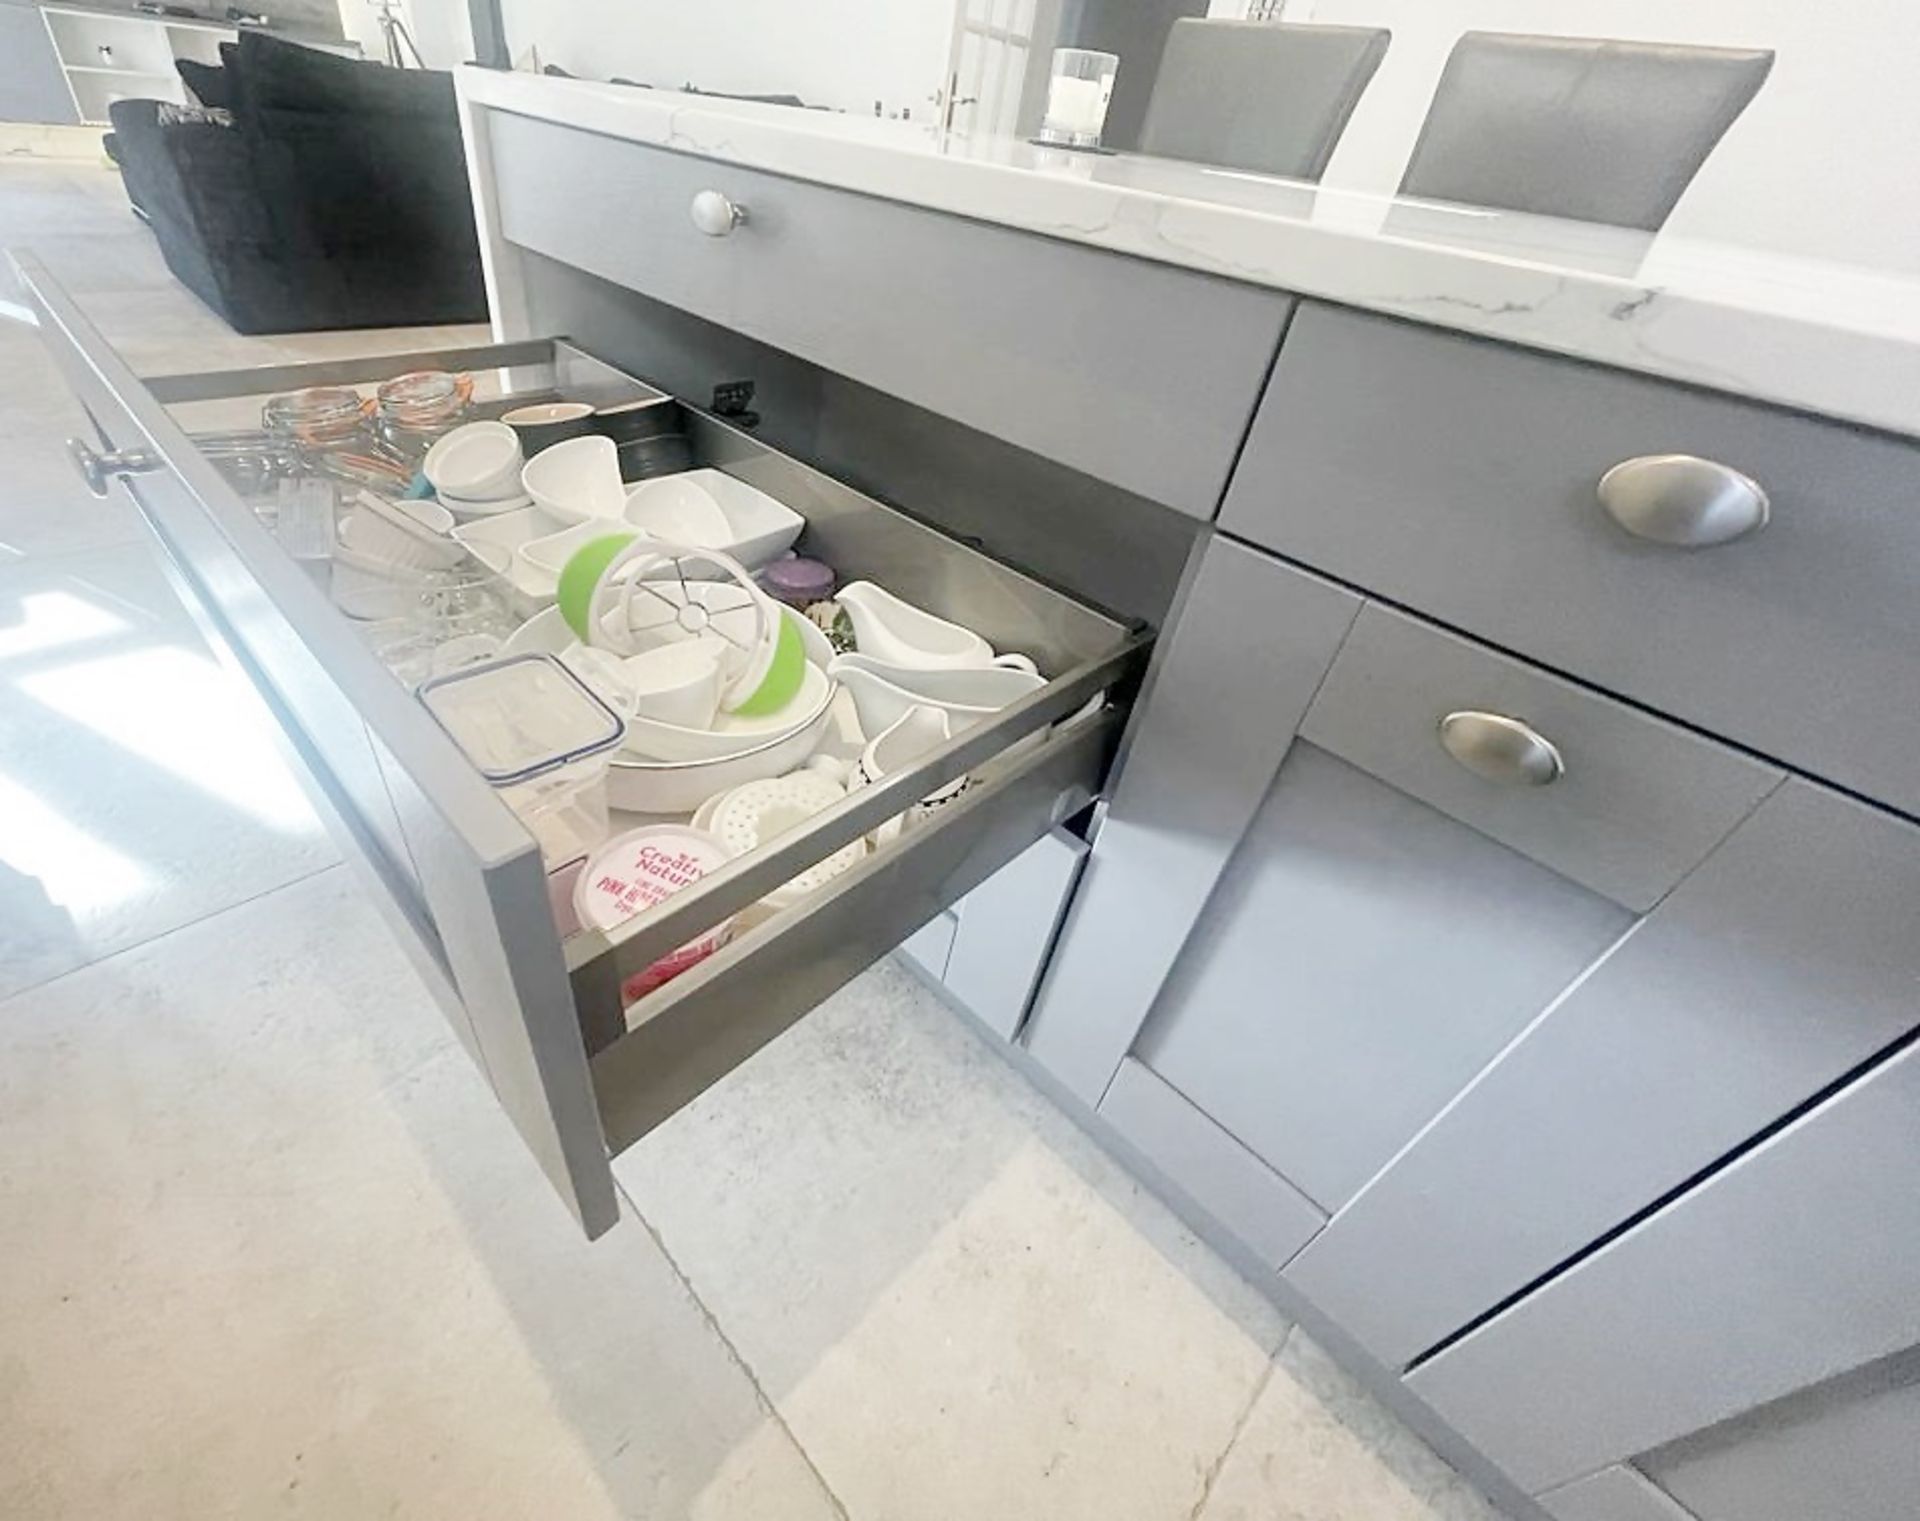 1 x SIEMATIC Bespoke Shaker-style Fitted Kitchen, Utility Room, Appliances & Modern Quartz Surfaces - Image 23 of 99